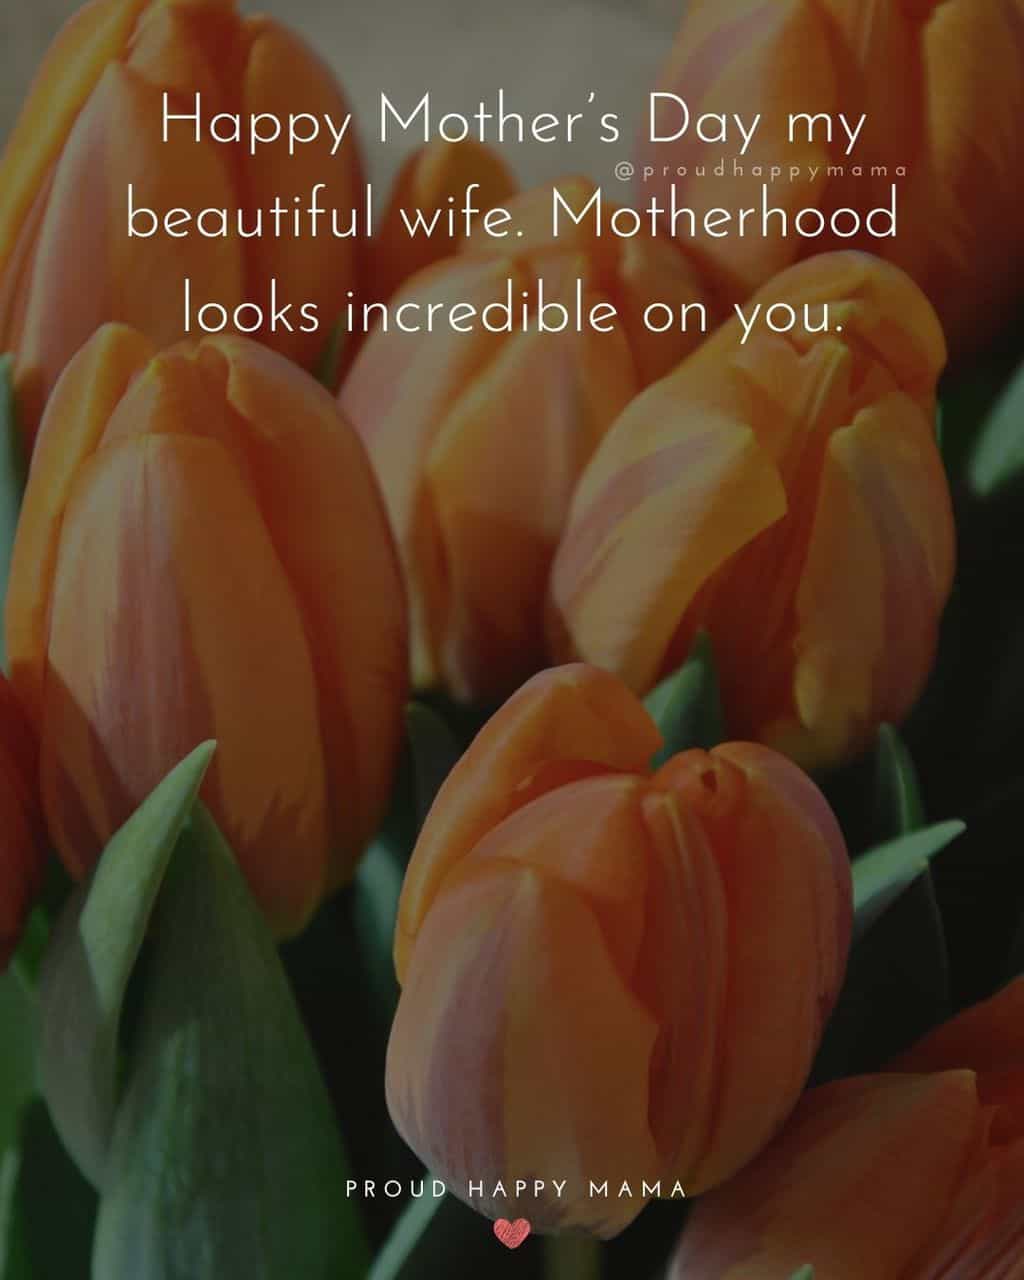 Happy Mothers Day Quotes For Wife - Happy Mother’s Day my beautiful wife. Motherhood looks incredible on you.’